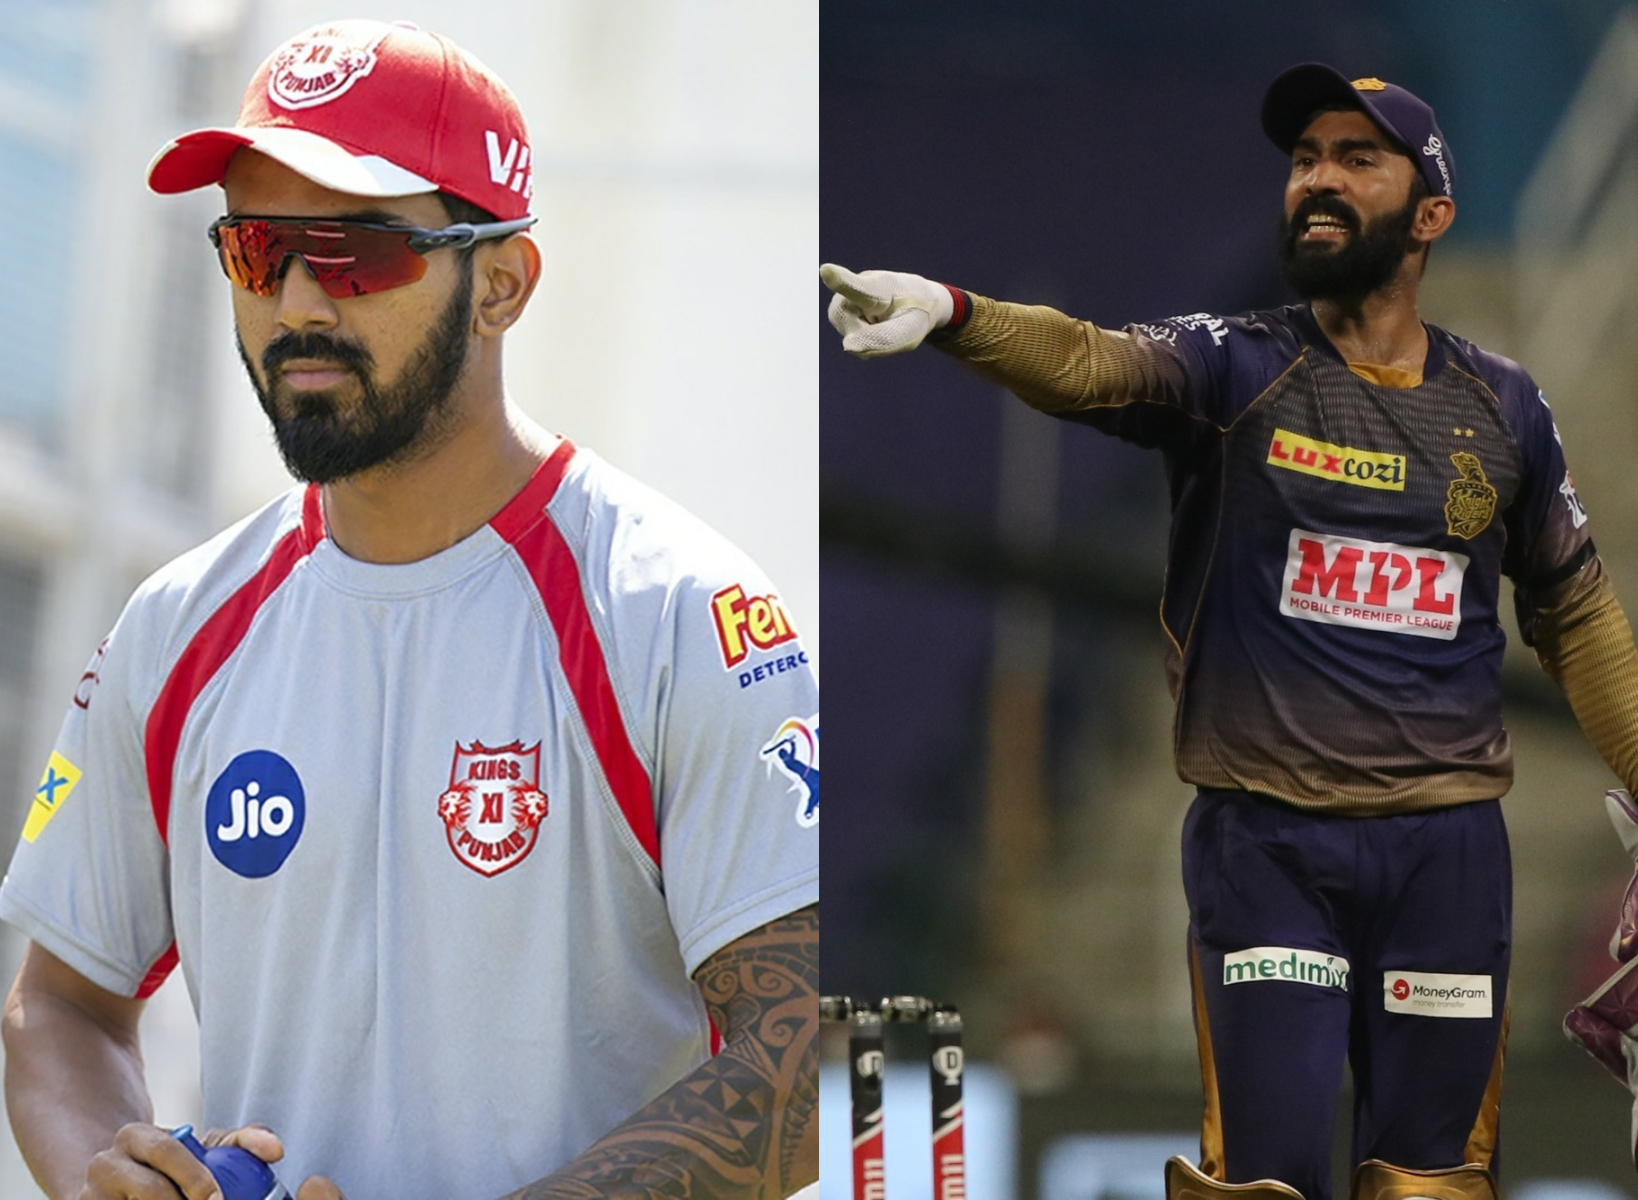 KXIP have won just one match out of 6, while KKR have won 3 out of 5 matches